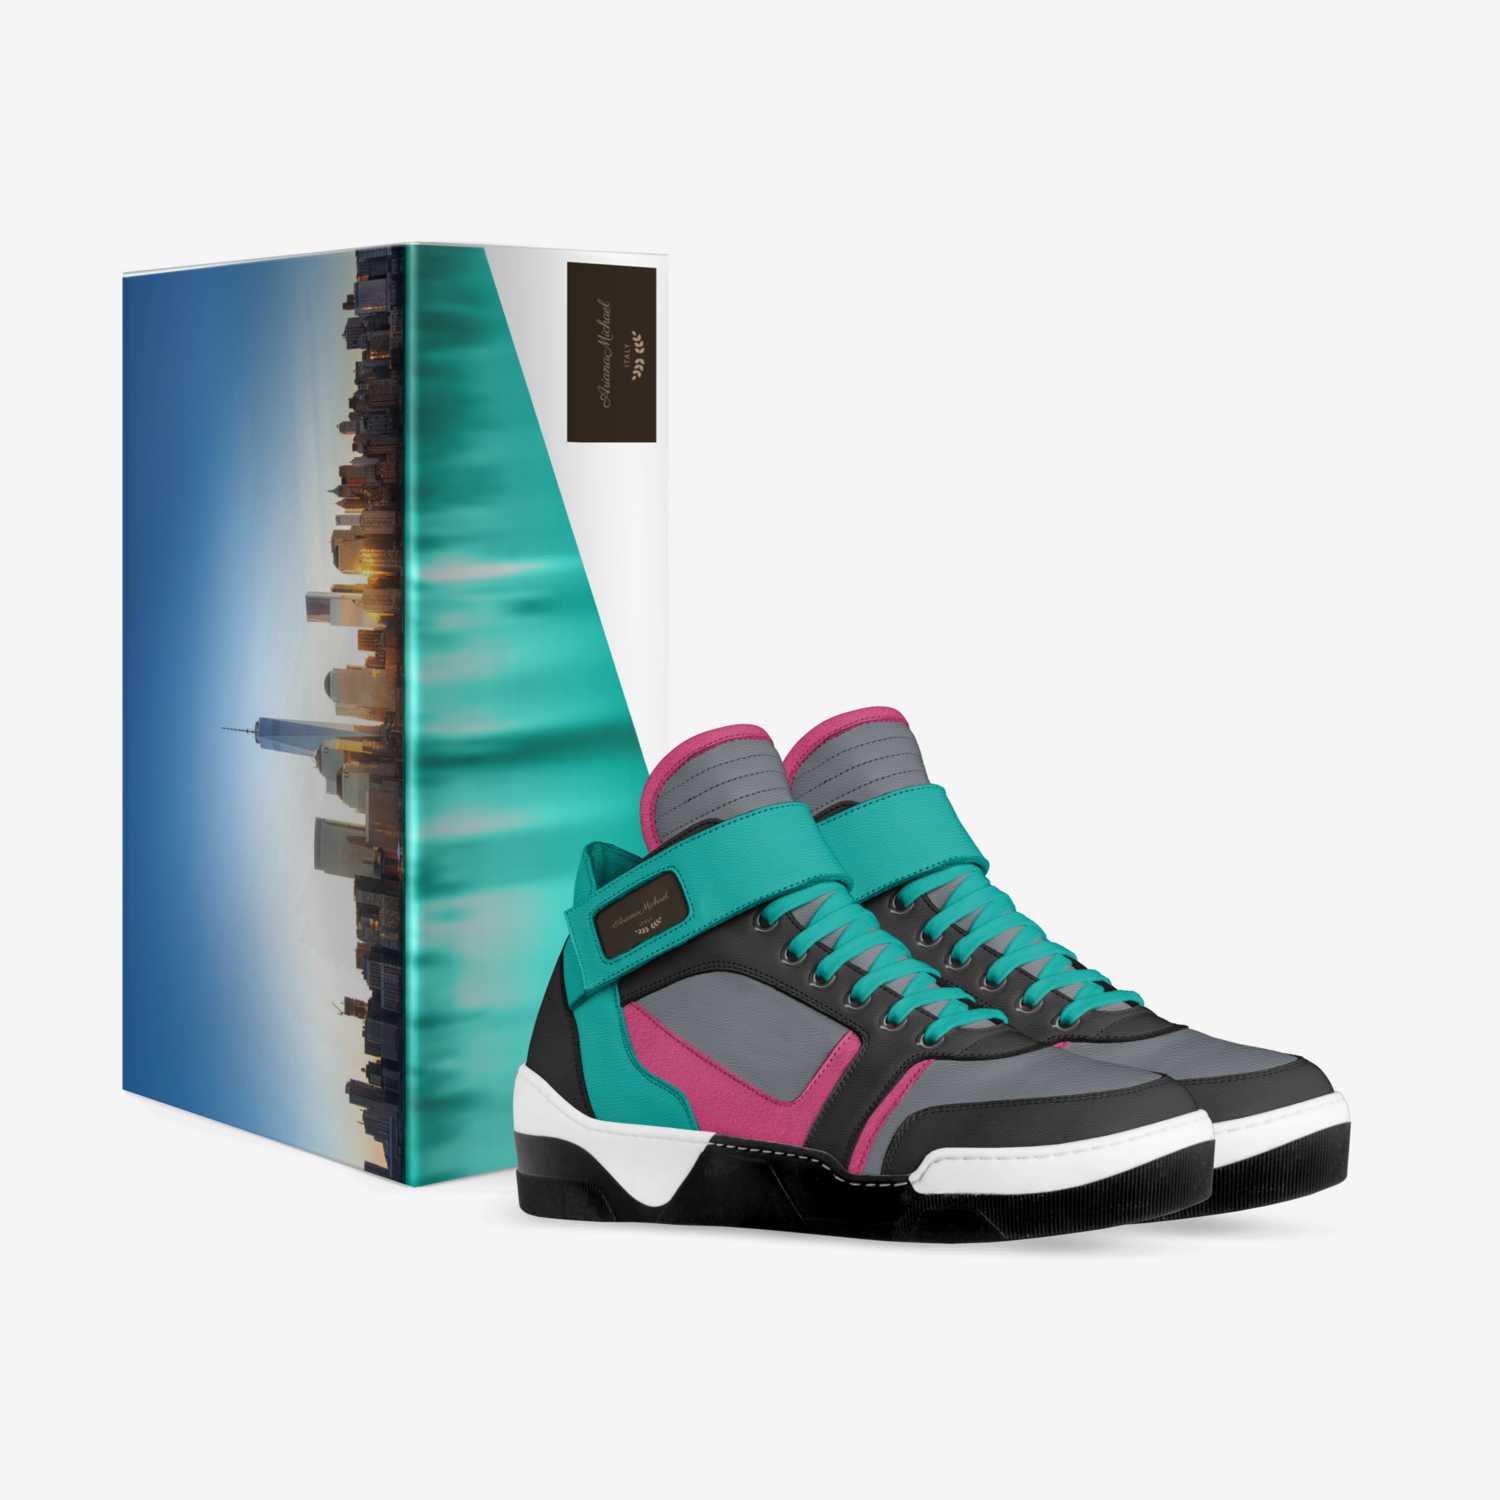 ArianaMichael custom made in Italy shoes by Jason Poulis | Box view